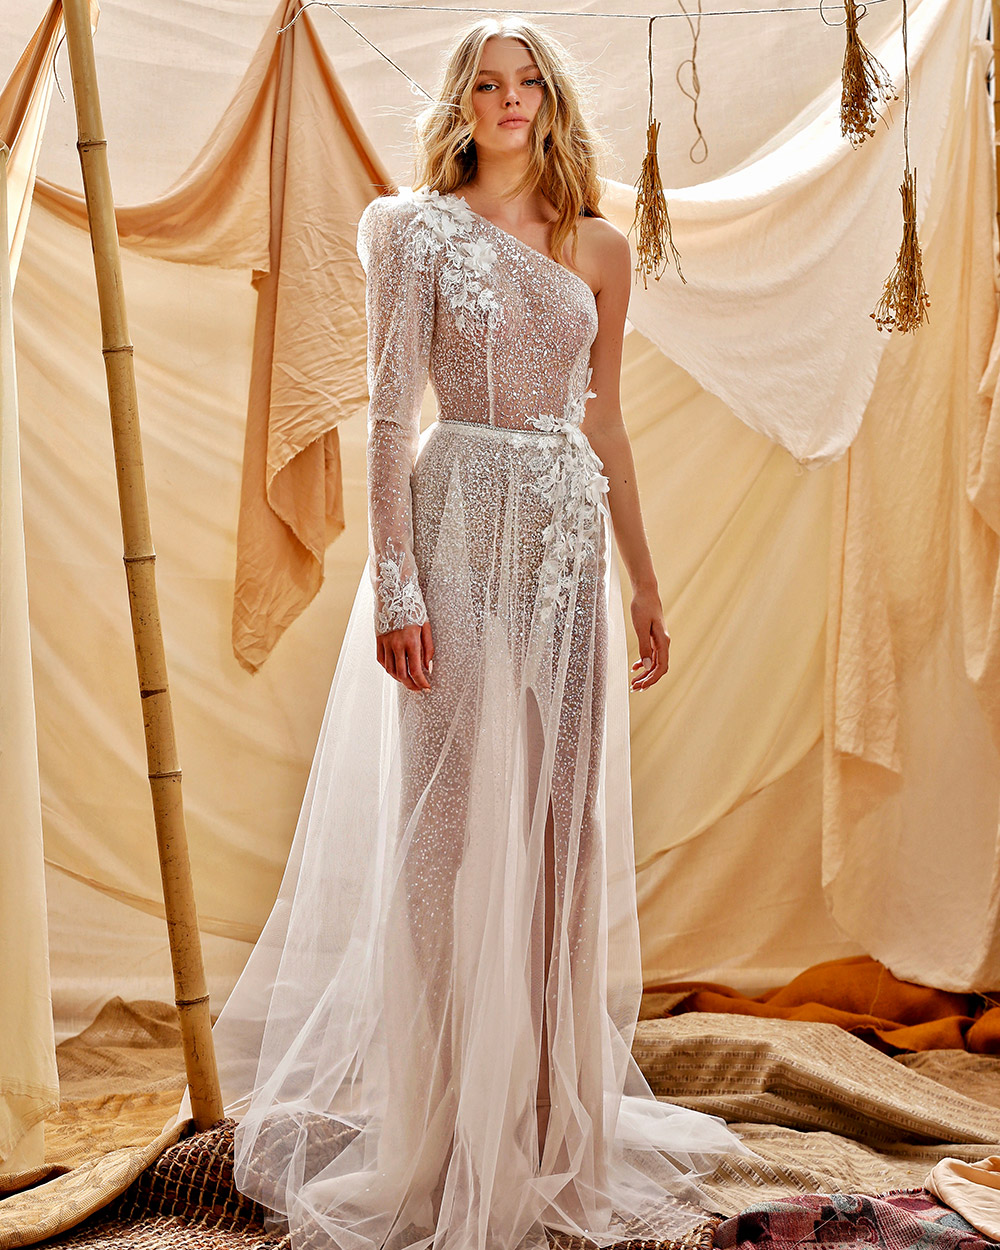 MUSE by Berta Spring 2021 Collection. www.theweddingnotebook.com